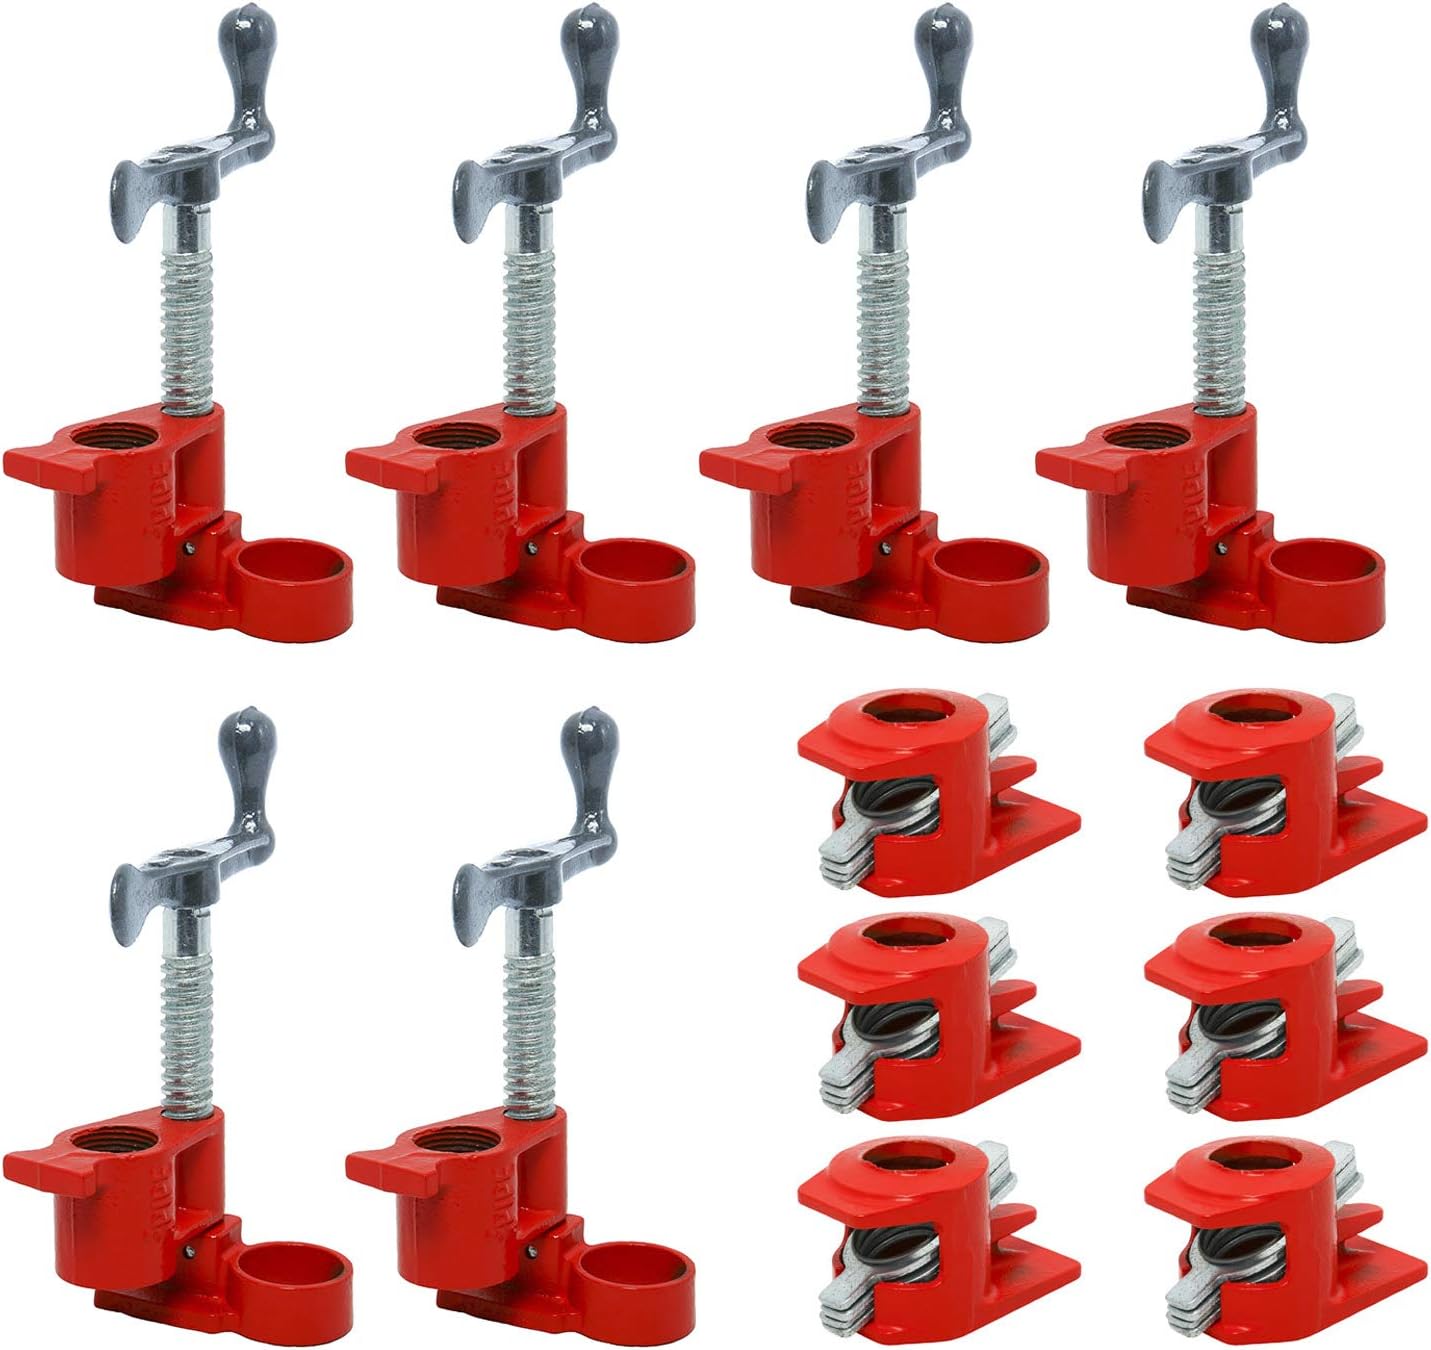 Yaemart Corportation (6 Pack) 3/4" Wood Gluing Pipe Clamp Set Red Cast Iron Clamps Heavy Duty Quick Release Pipe Clamps for Woodworking